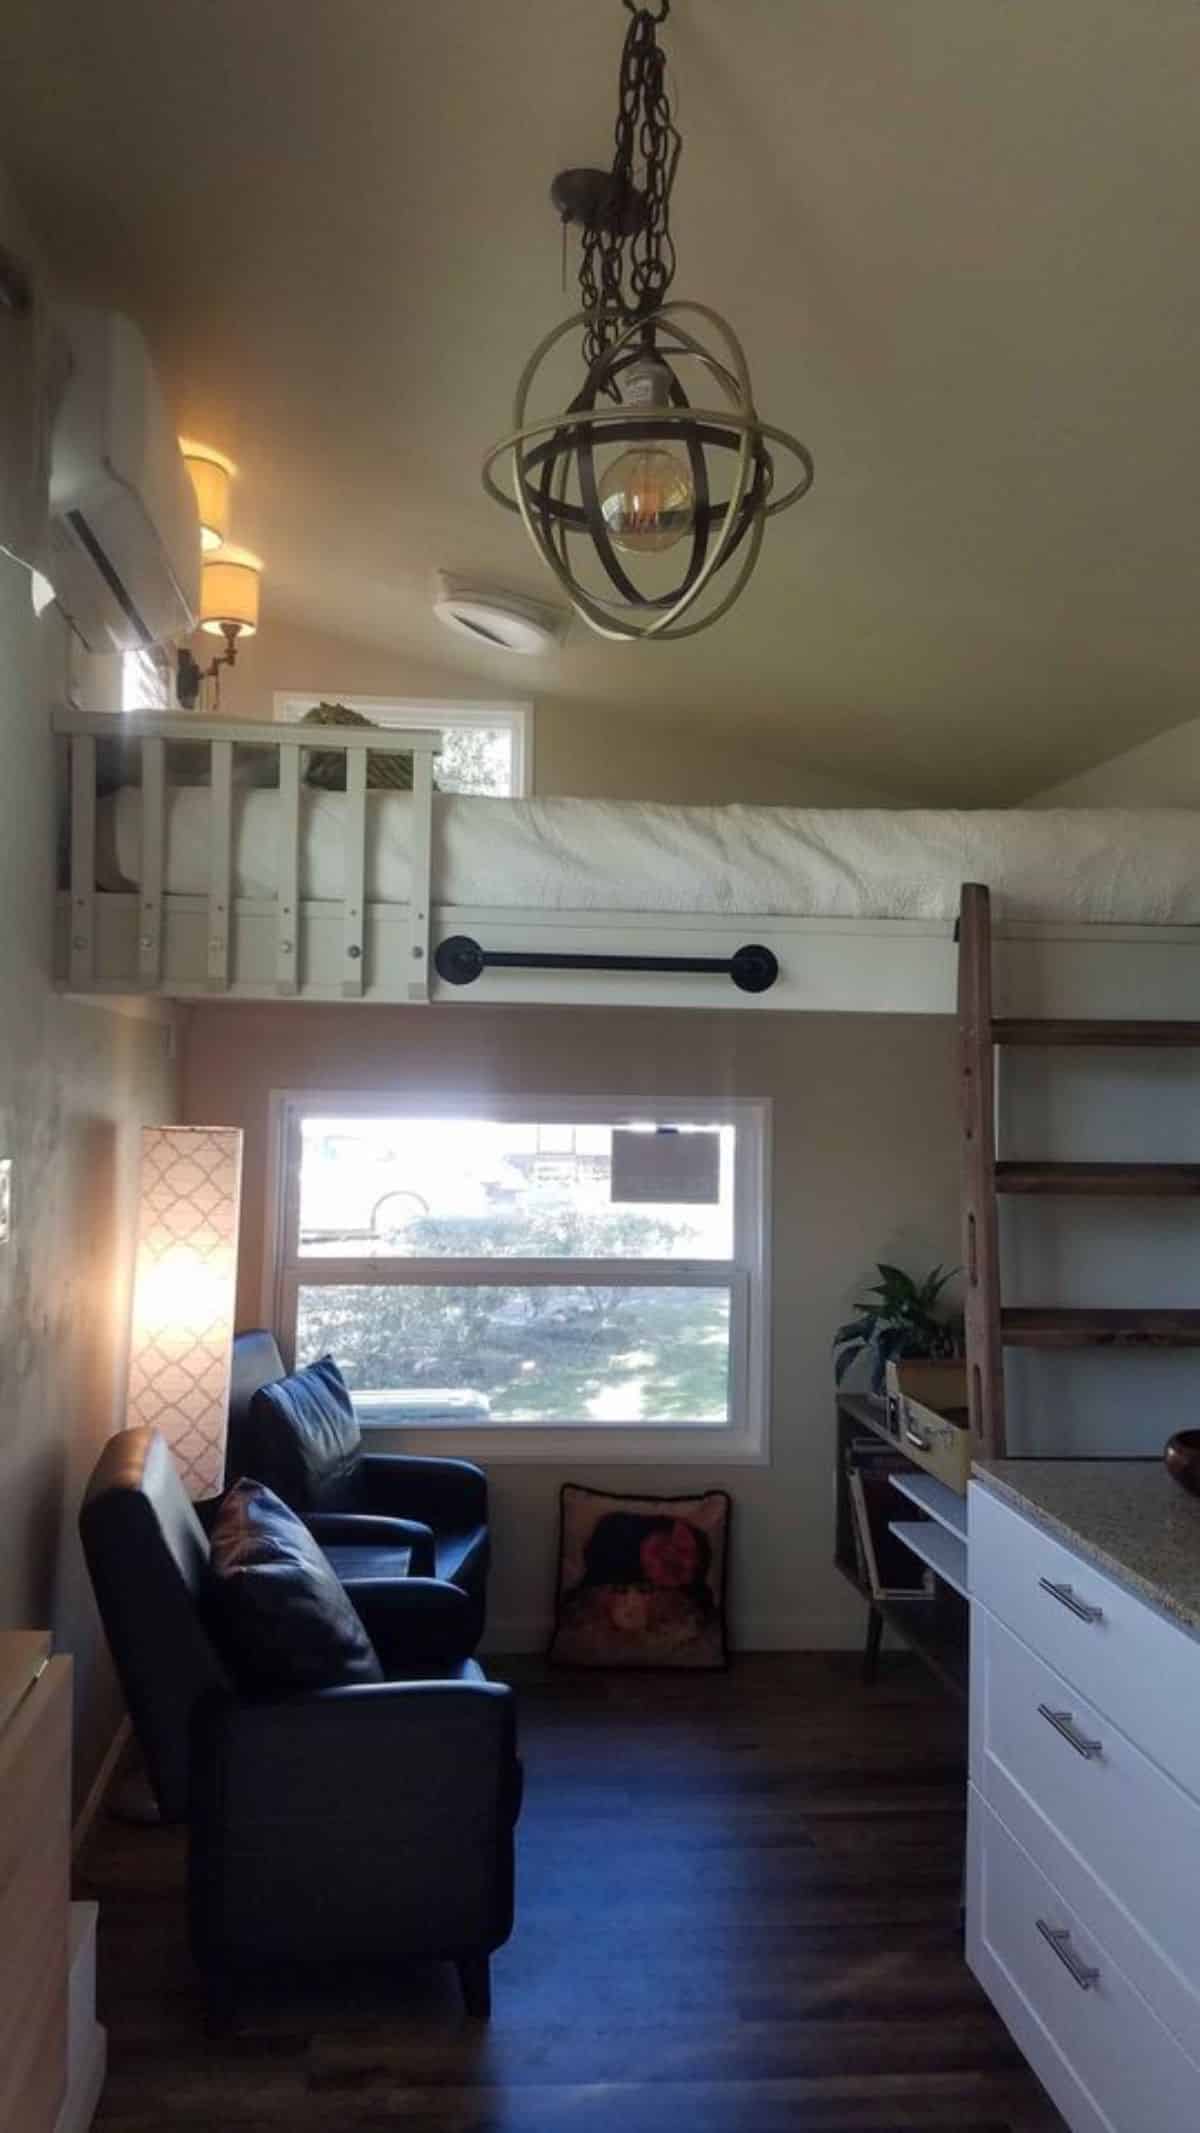 loft bedroom is above the living area is very cozy